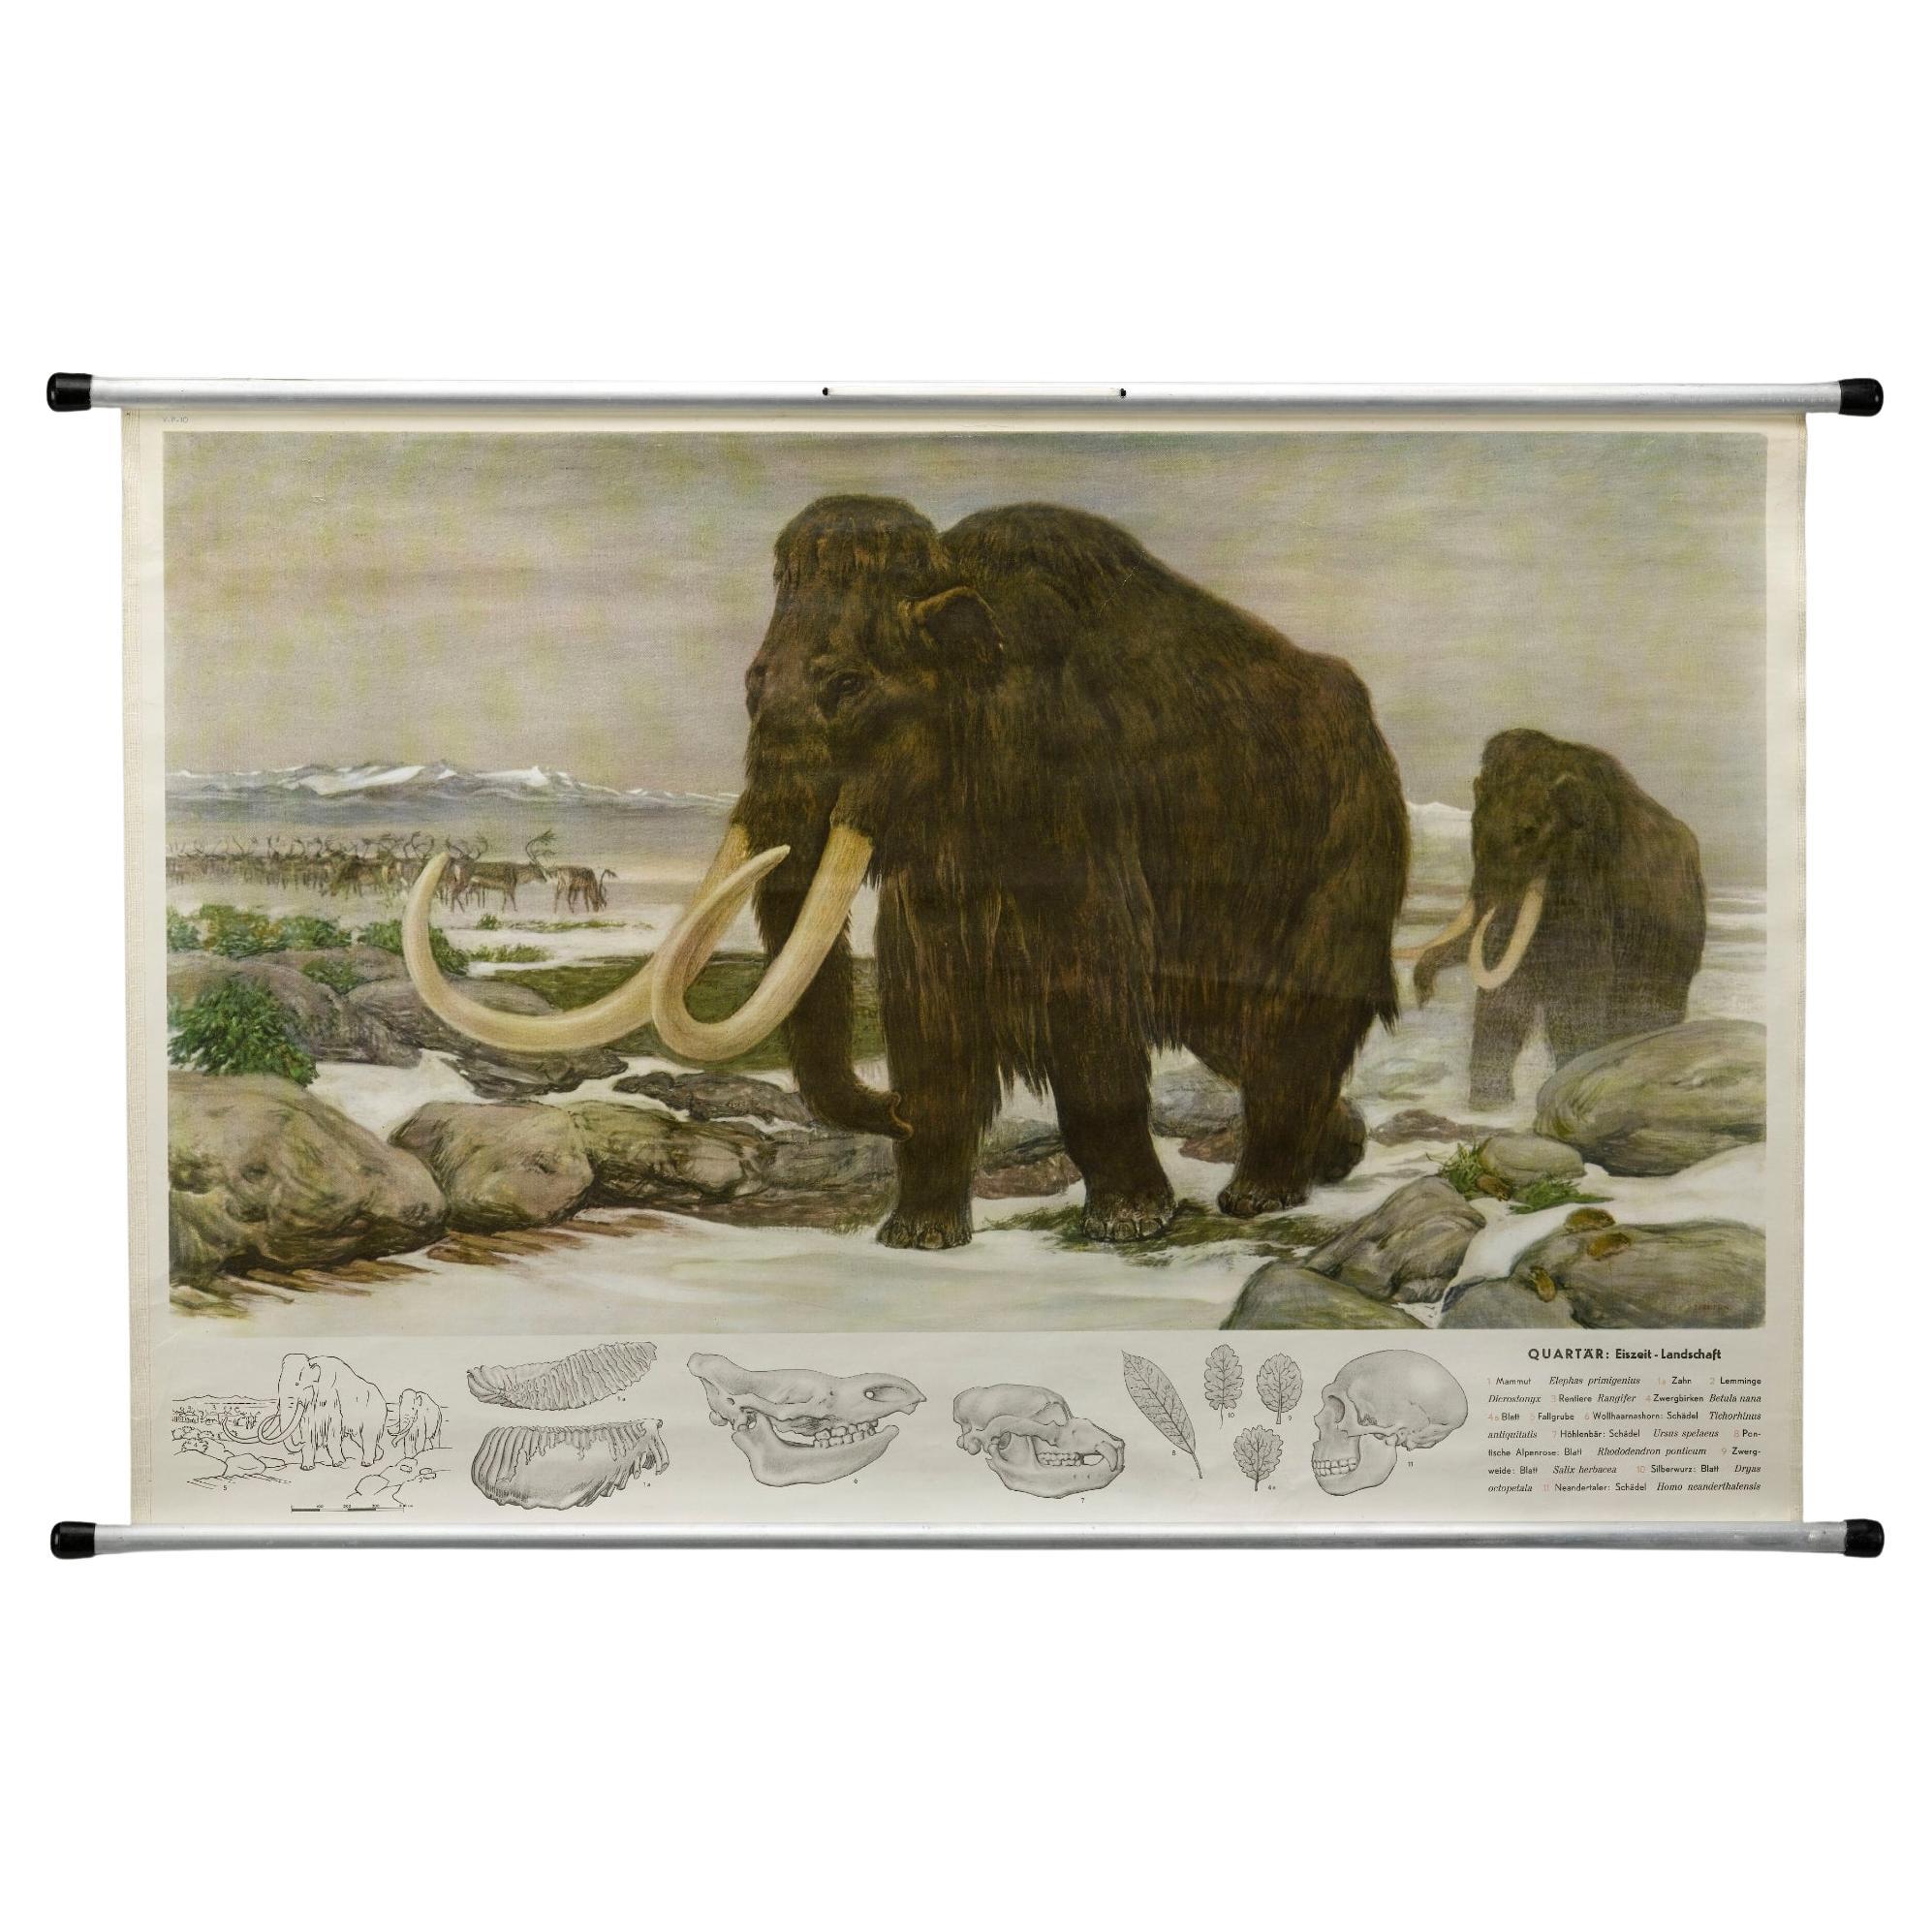 1955 "Quaternary: Ice-Age Landscape" Woolly Mammoth Vintage Wall Hanging  For Sale